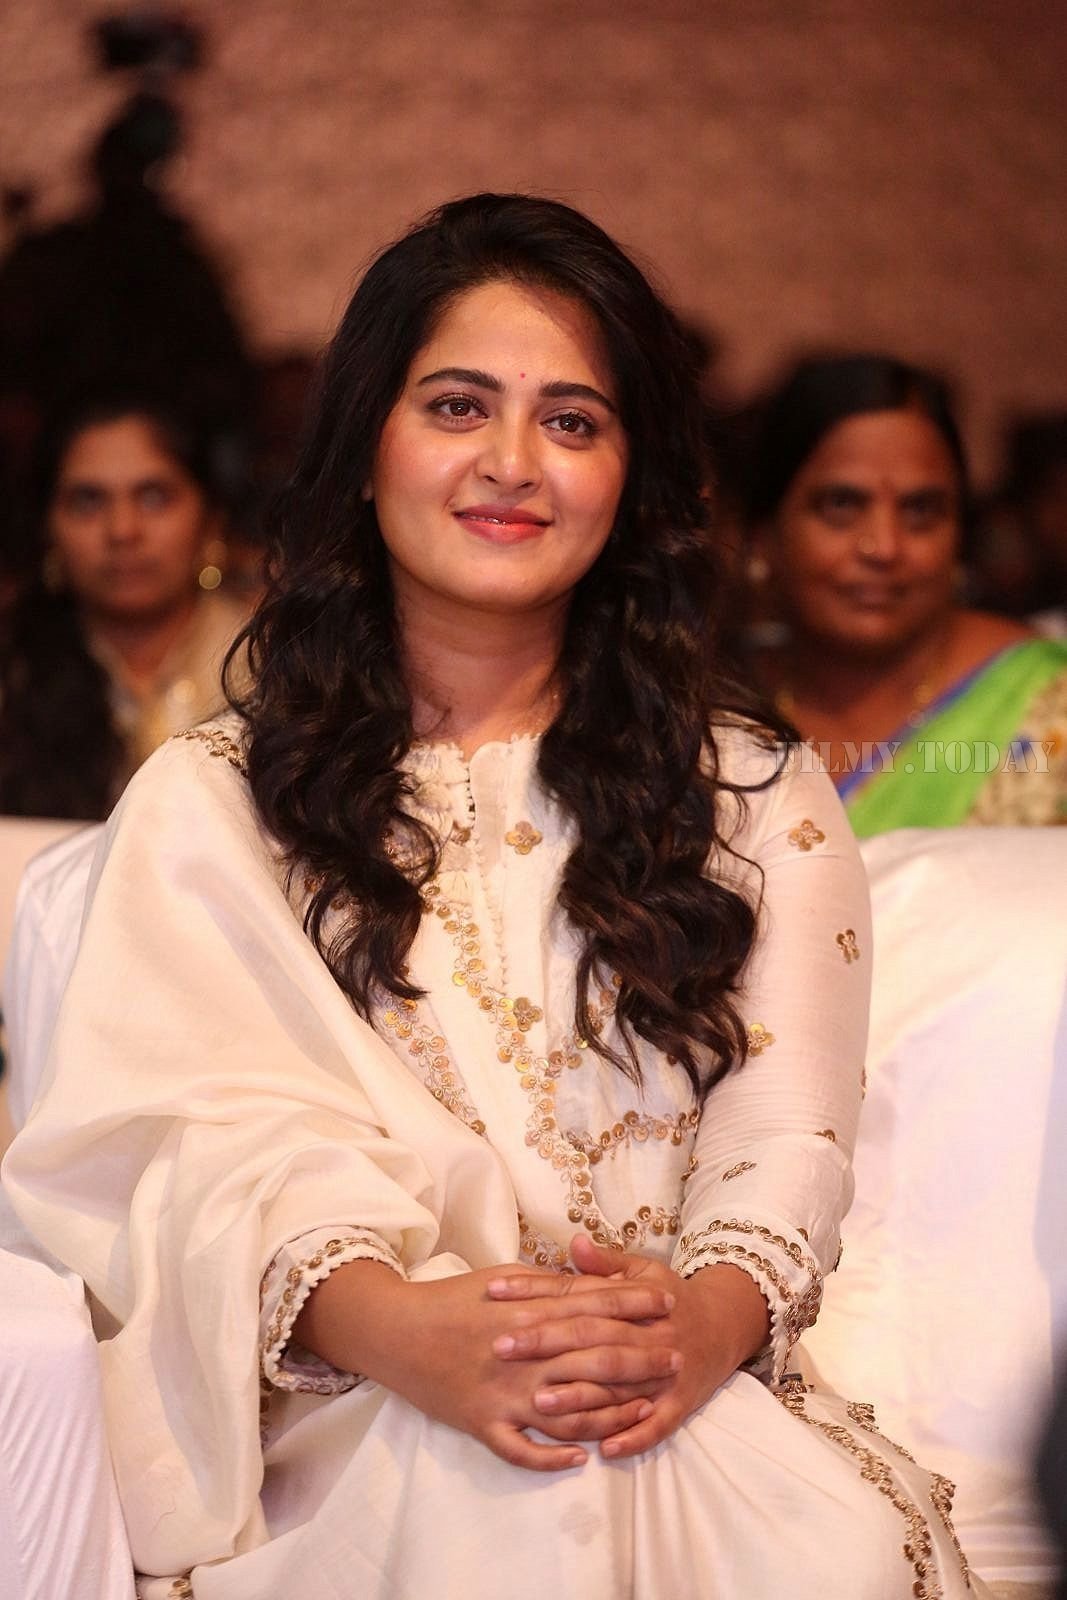 Anushka Shetty - Bhaagamathie Pre Release Event Photos | Picture 1560365